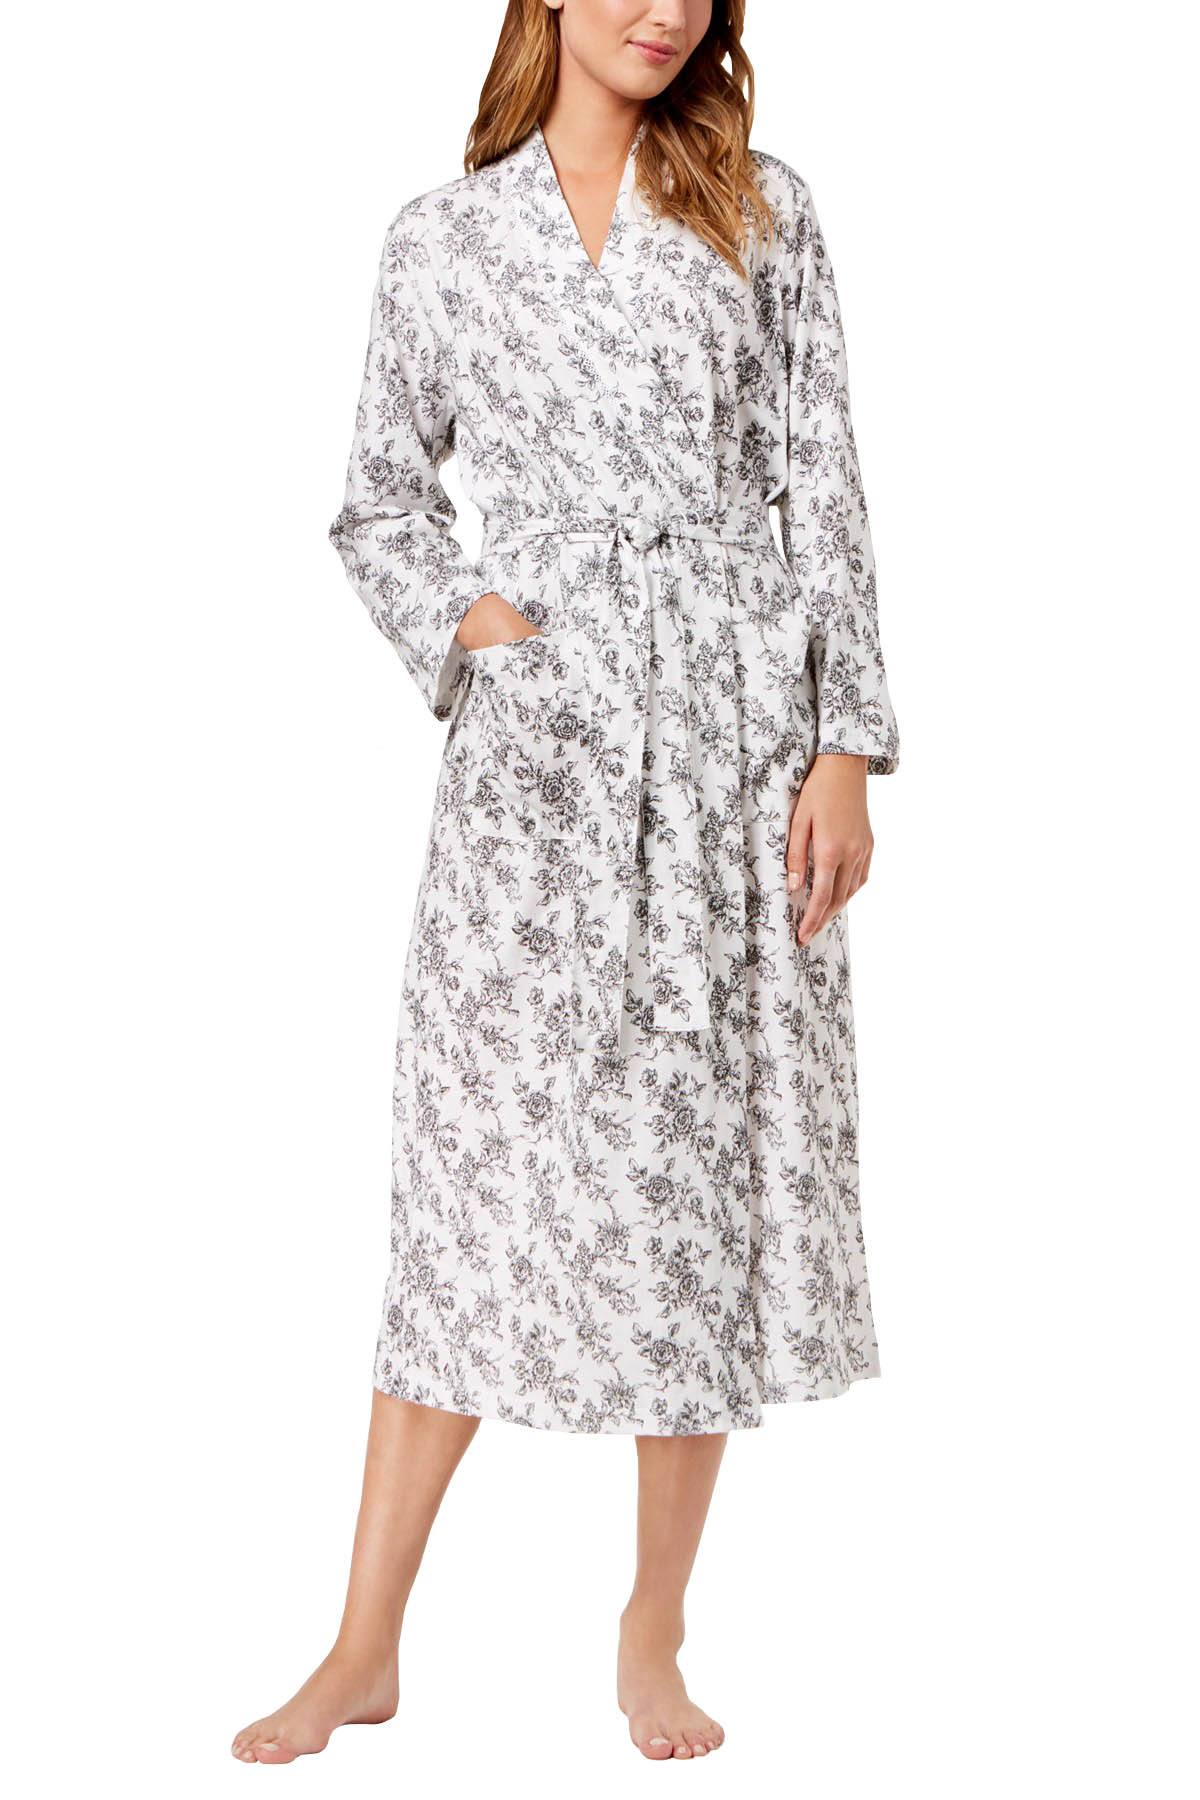 Charter Club Intimates Rose-Toile Printed Cotton Wrap Robe